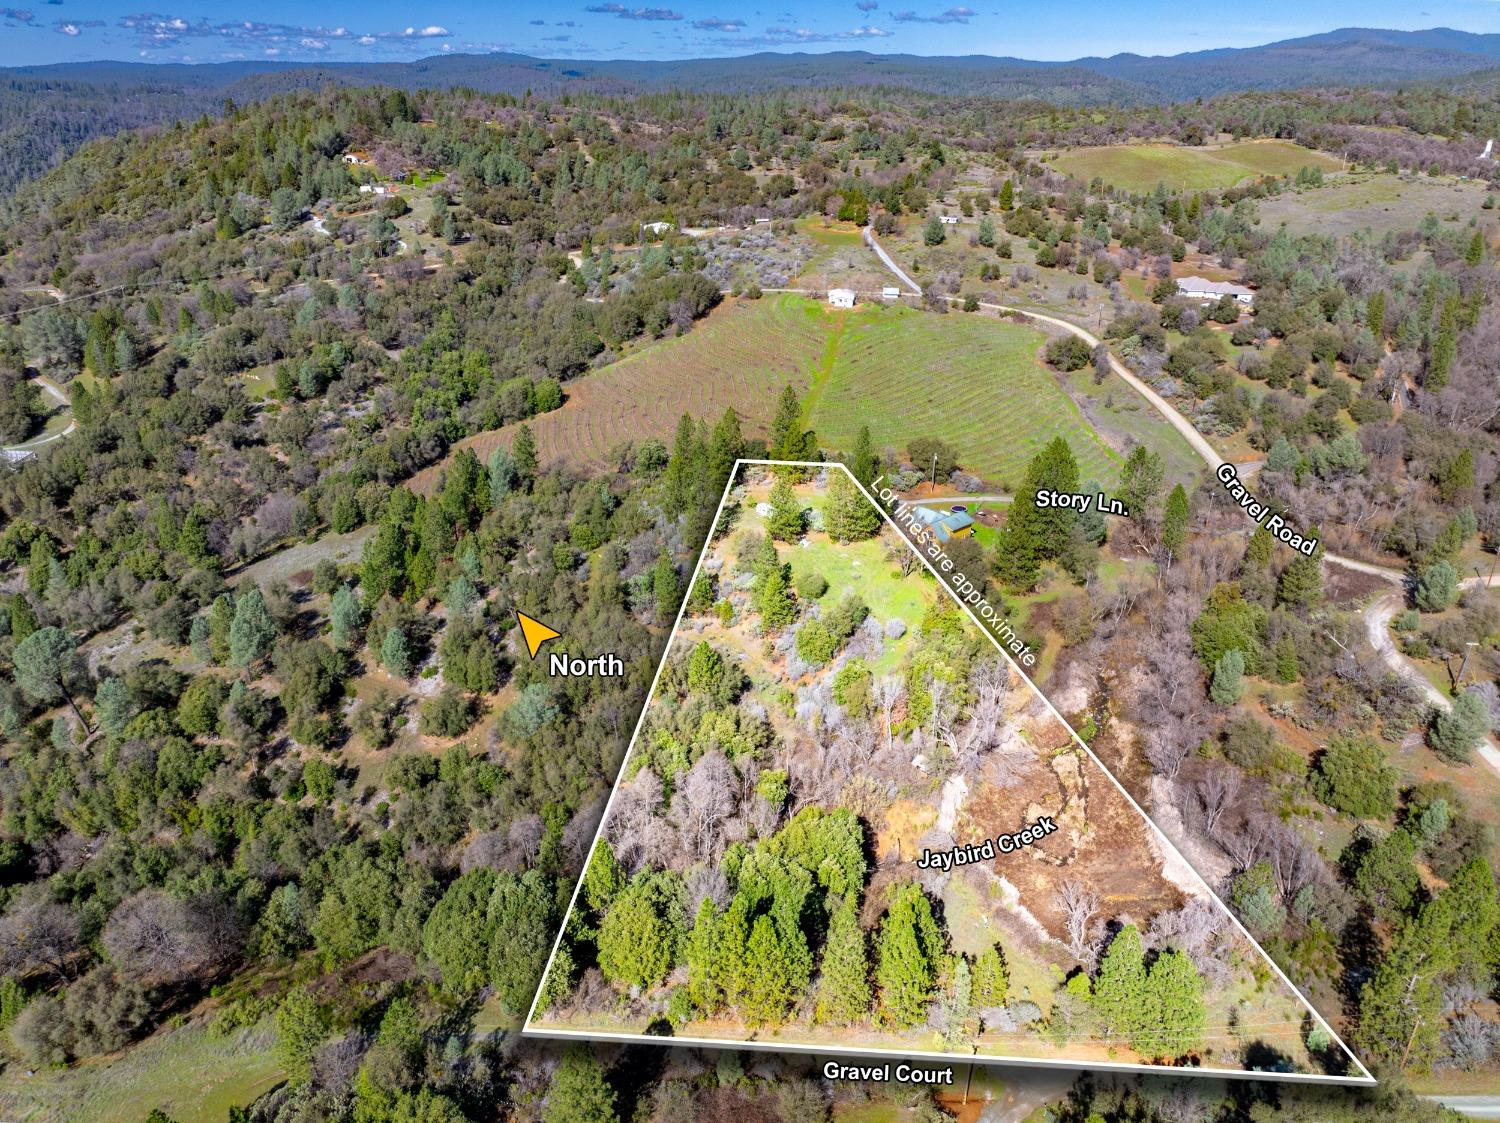 Photo of 1000 Story Ln in Placerville, CA